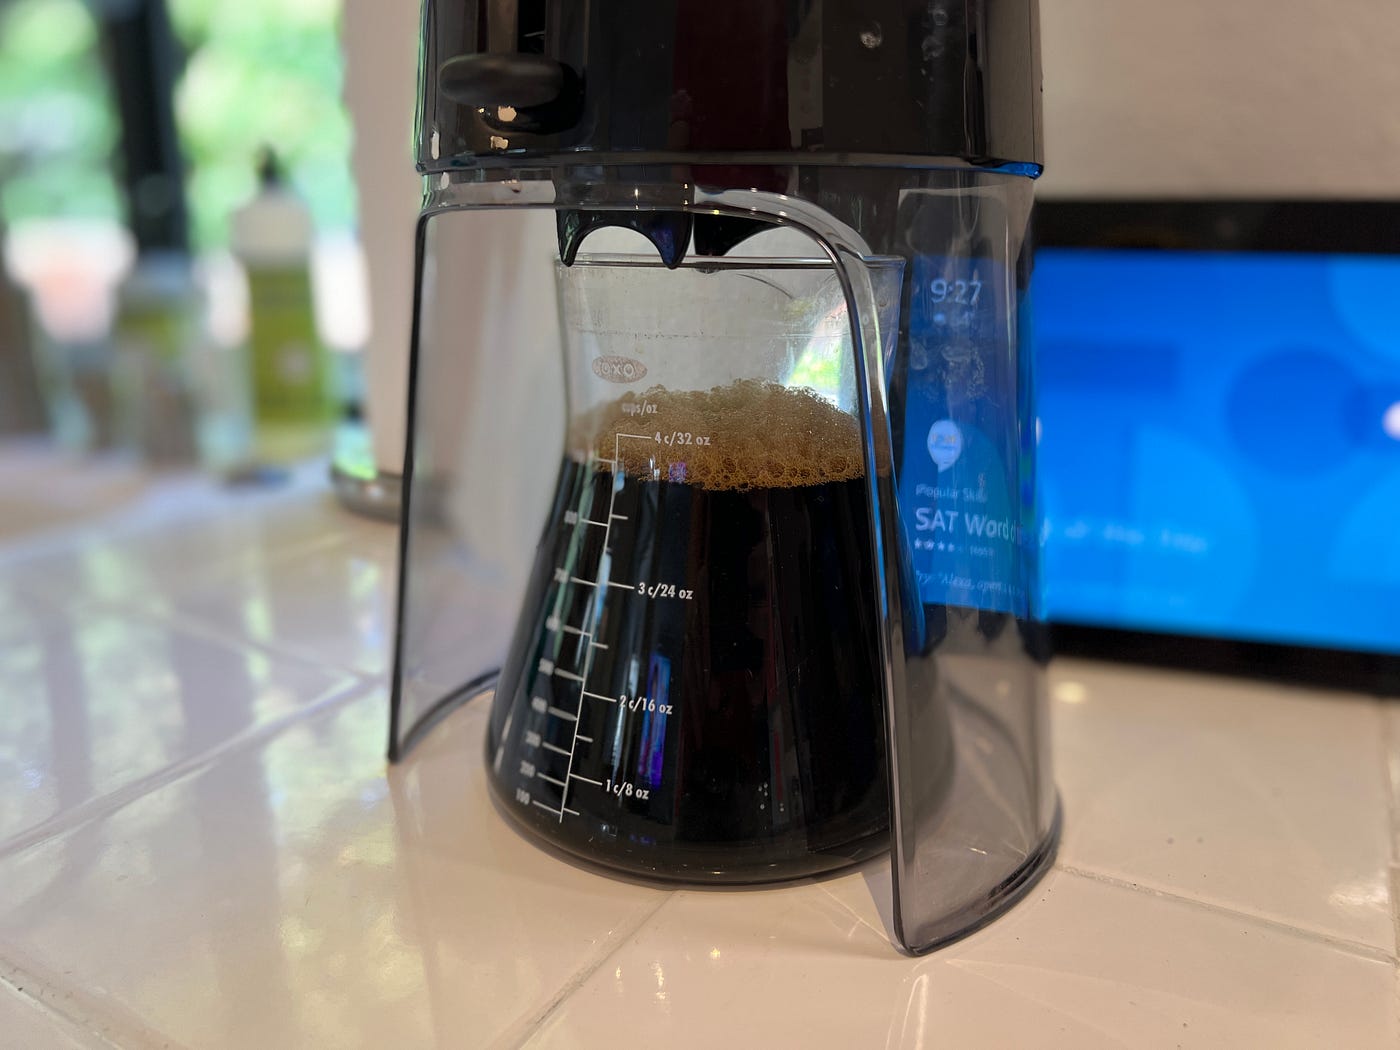 Oxo Good Grips Pour-Over Coffee Maker review: Oxo's simple little